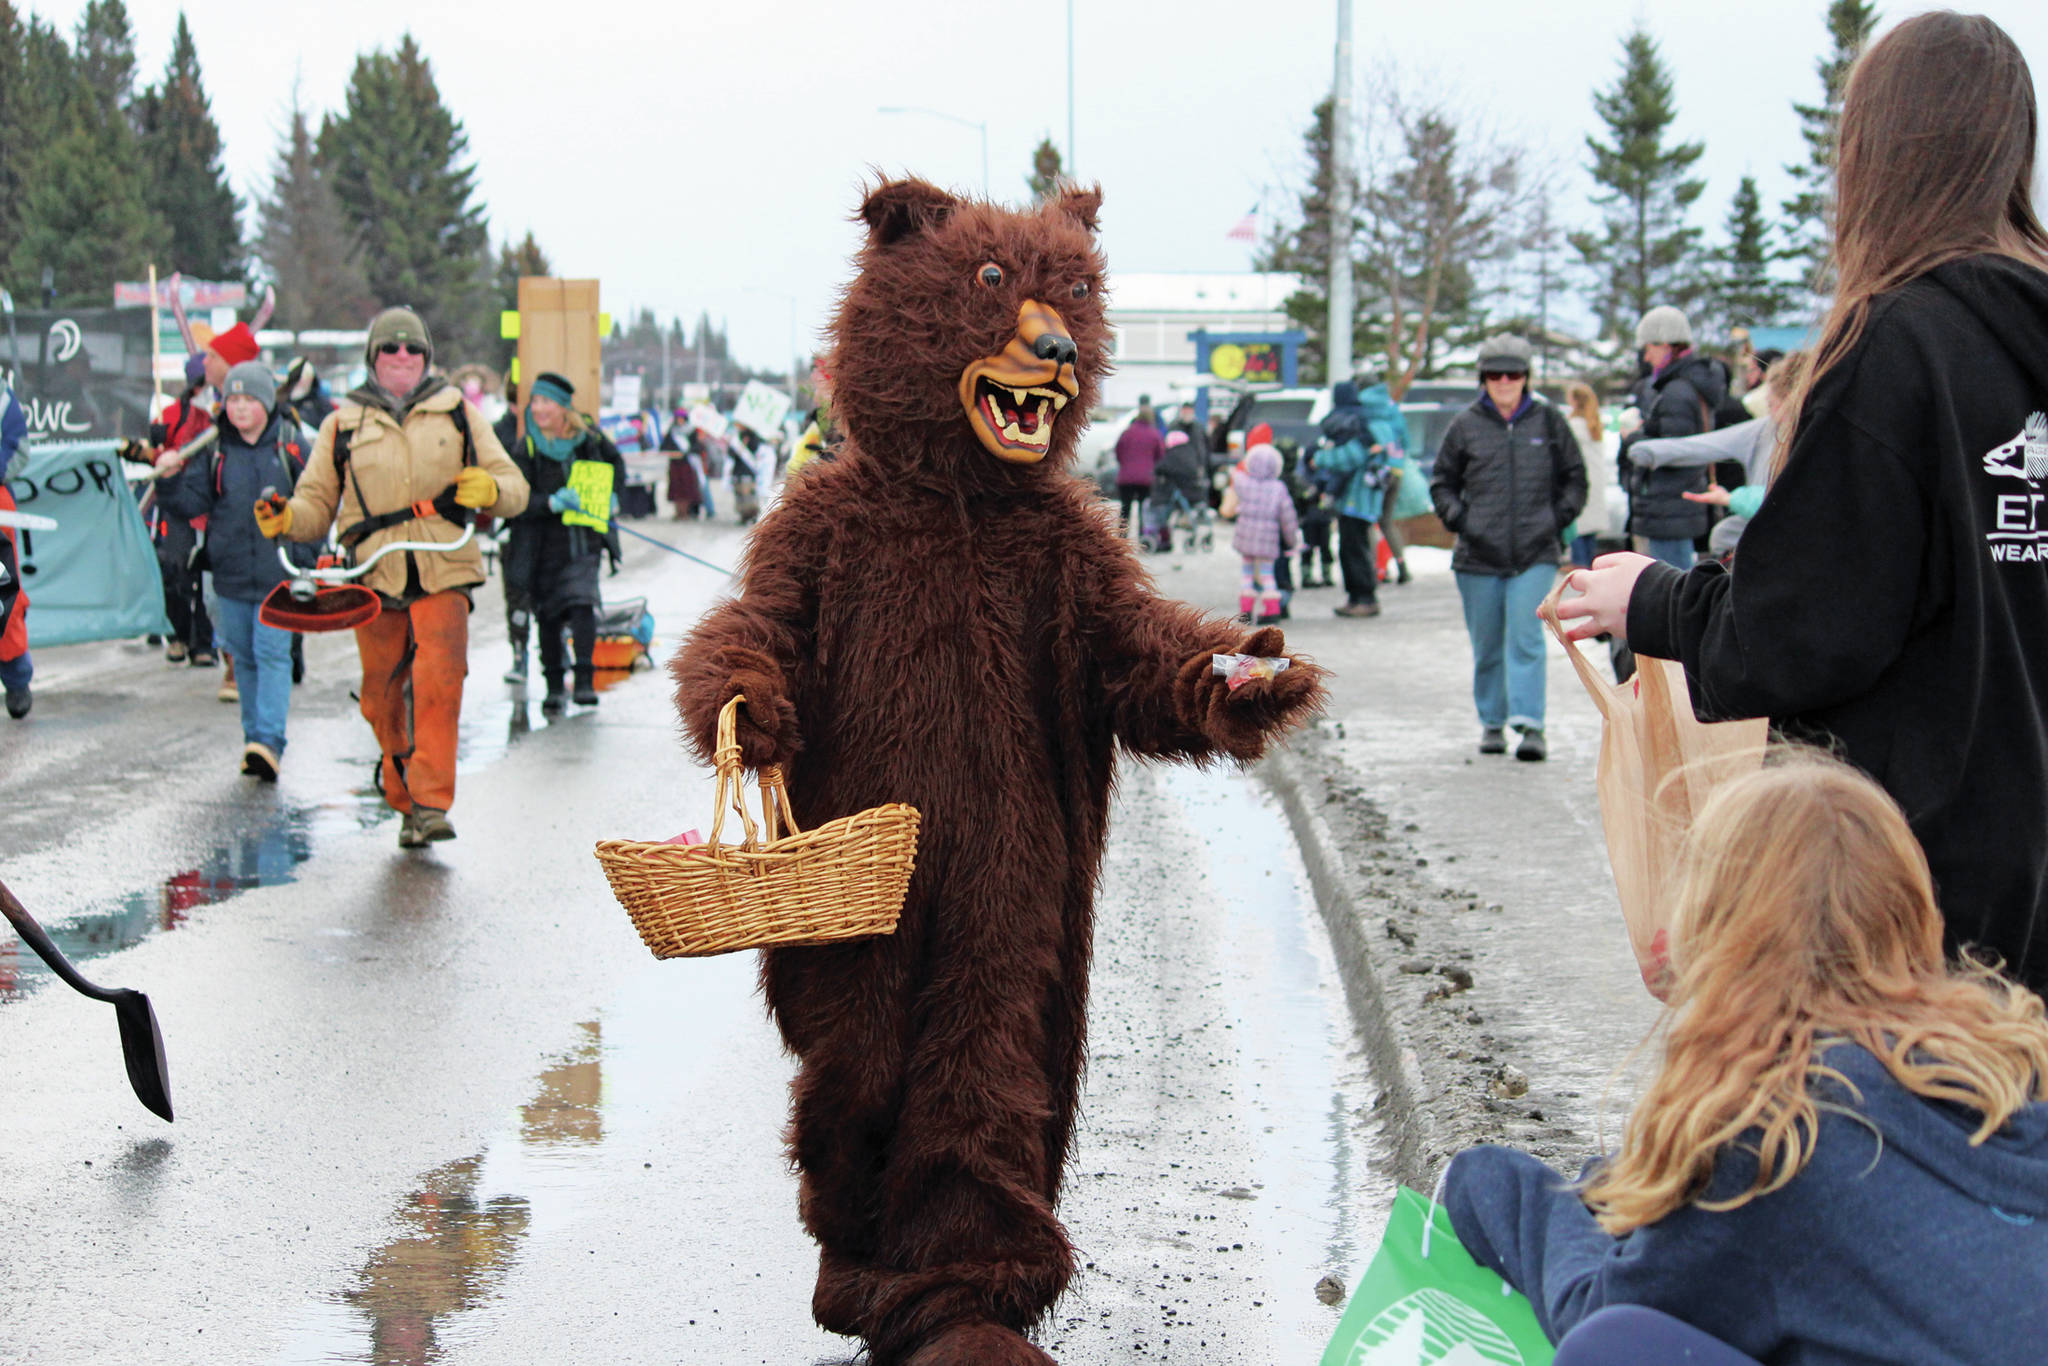 A parade marcher in a bear costume hands out goodies to families attending this year’s Homer Winter Carnival on Saturday, Feb. 8, 2020 on Pioneer Avenue in Homer, Alaska. (Photo by Megan Pacer/Homer News)